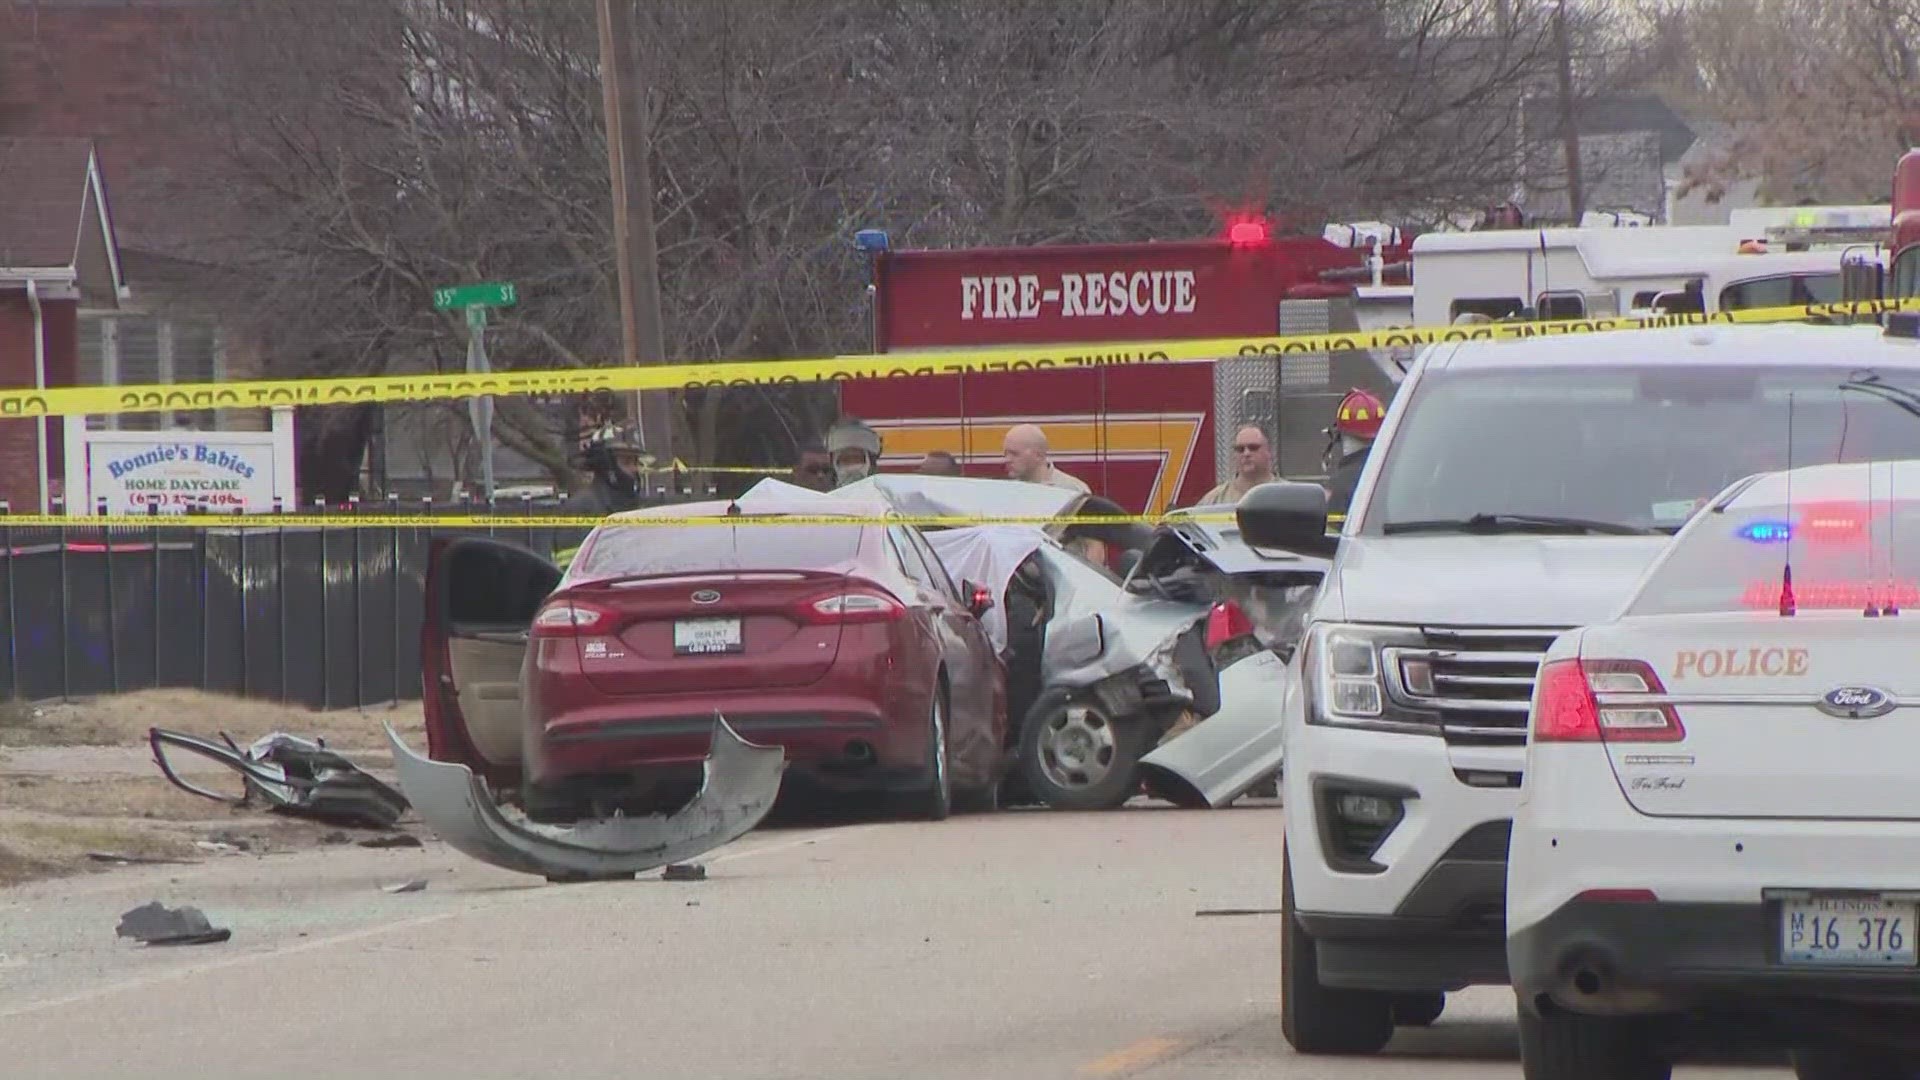 A man was charged for a crash that killed two last week in East St. Louis. Police were pursuing a vehicle on Bond Avenue when it crashed into another car.